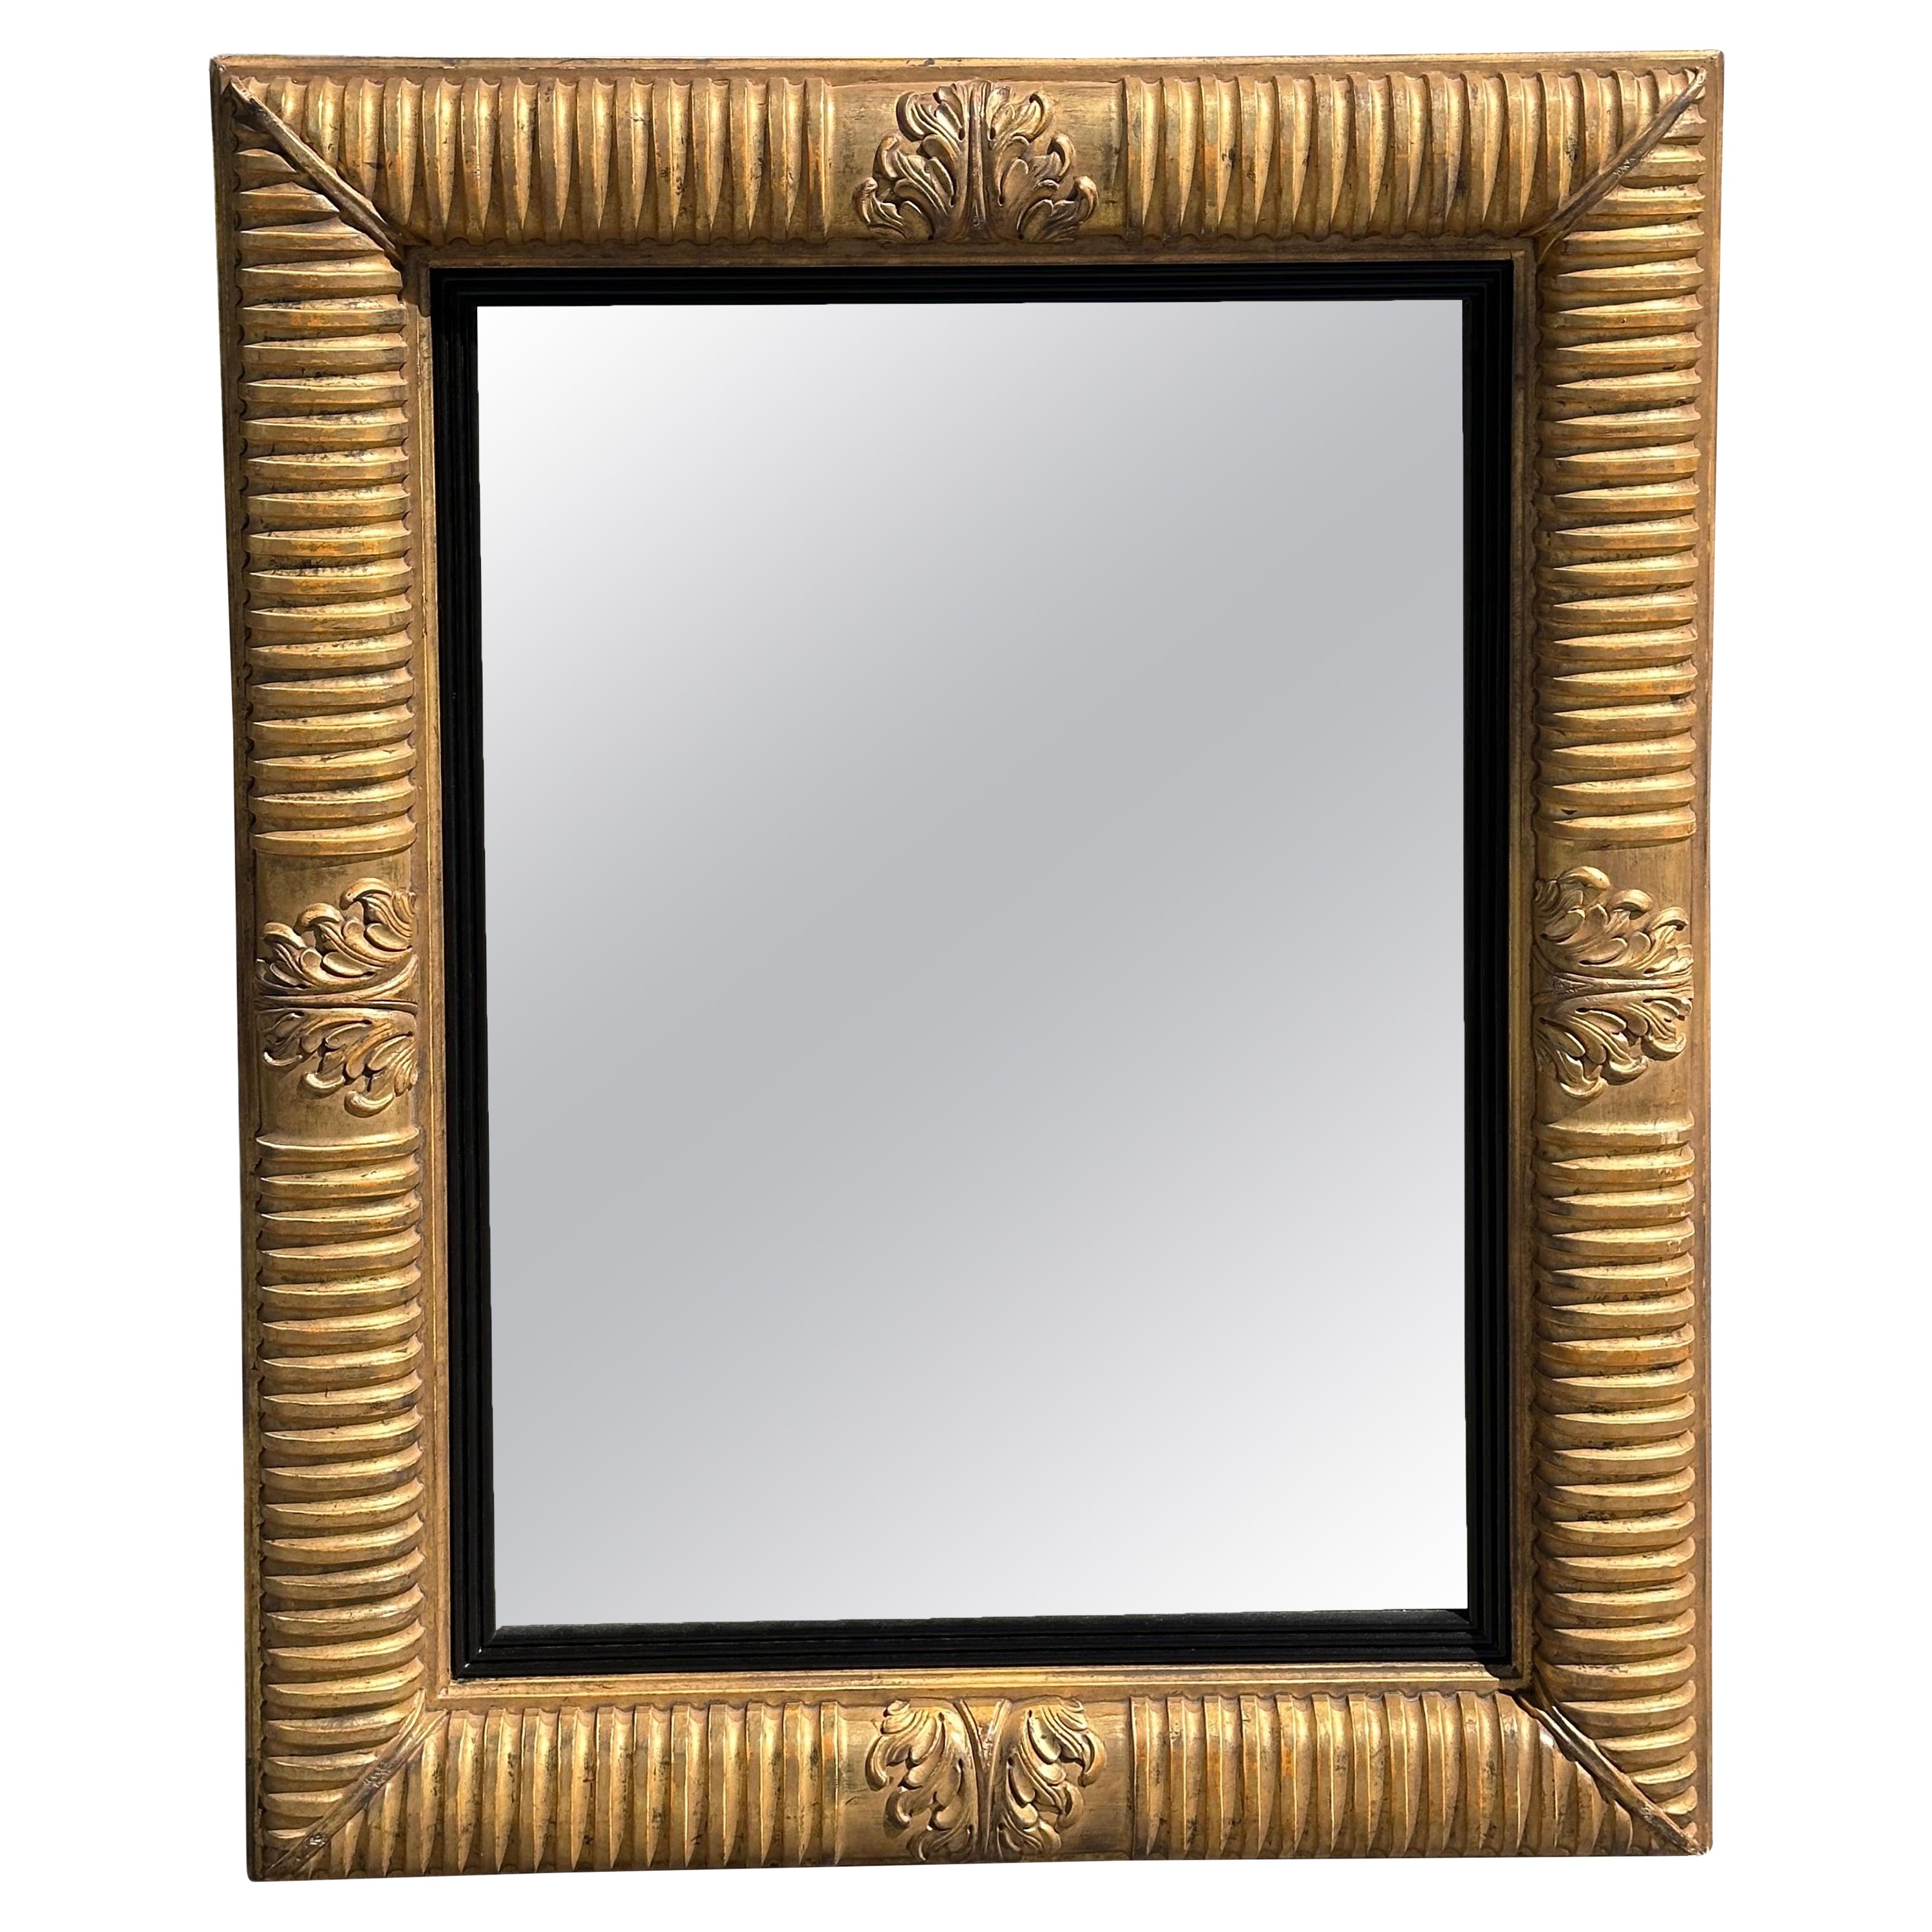 Michael Taylor Panache Regency Style Giltwood Mirror For Sale